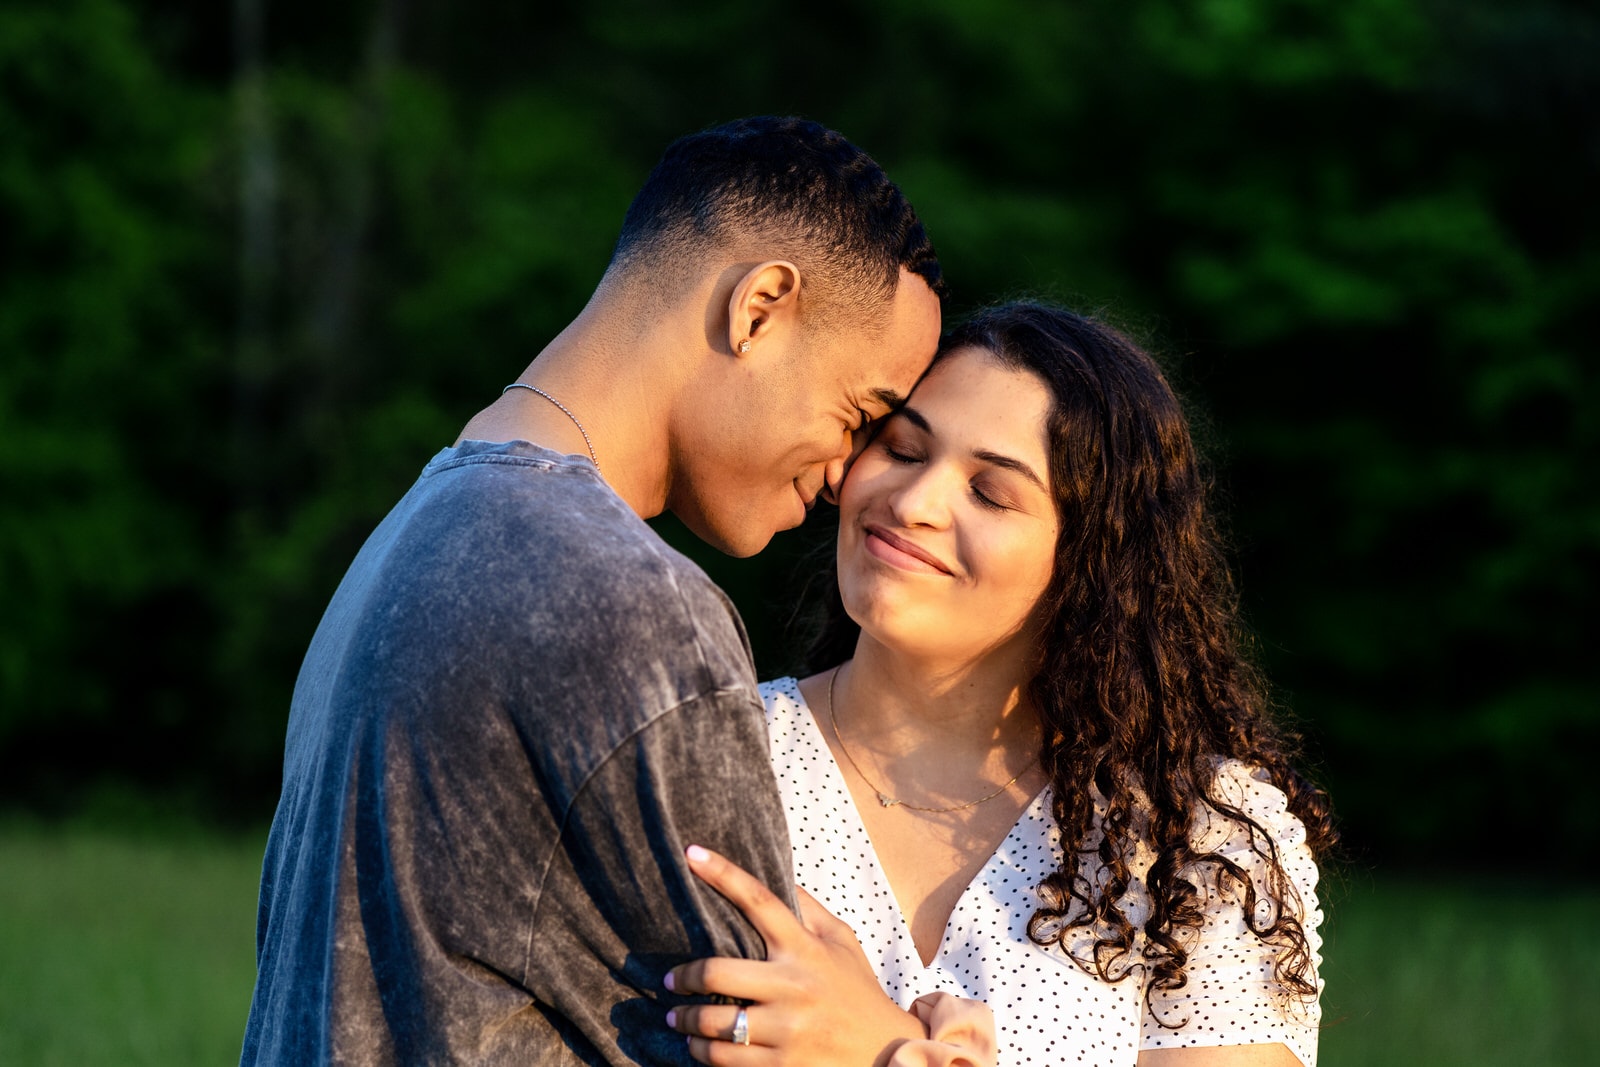 Your engagement photos should be a time for y'all to connect and be happy in love!